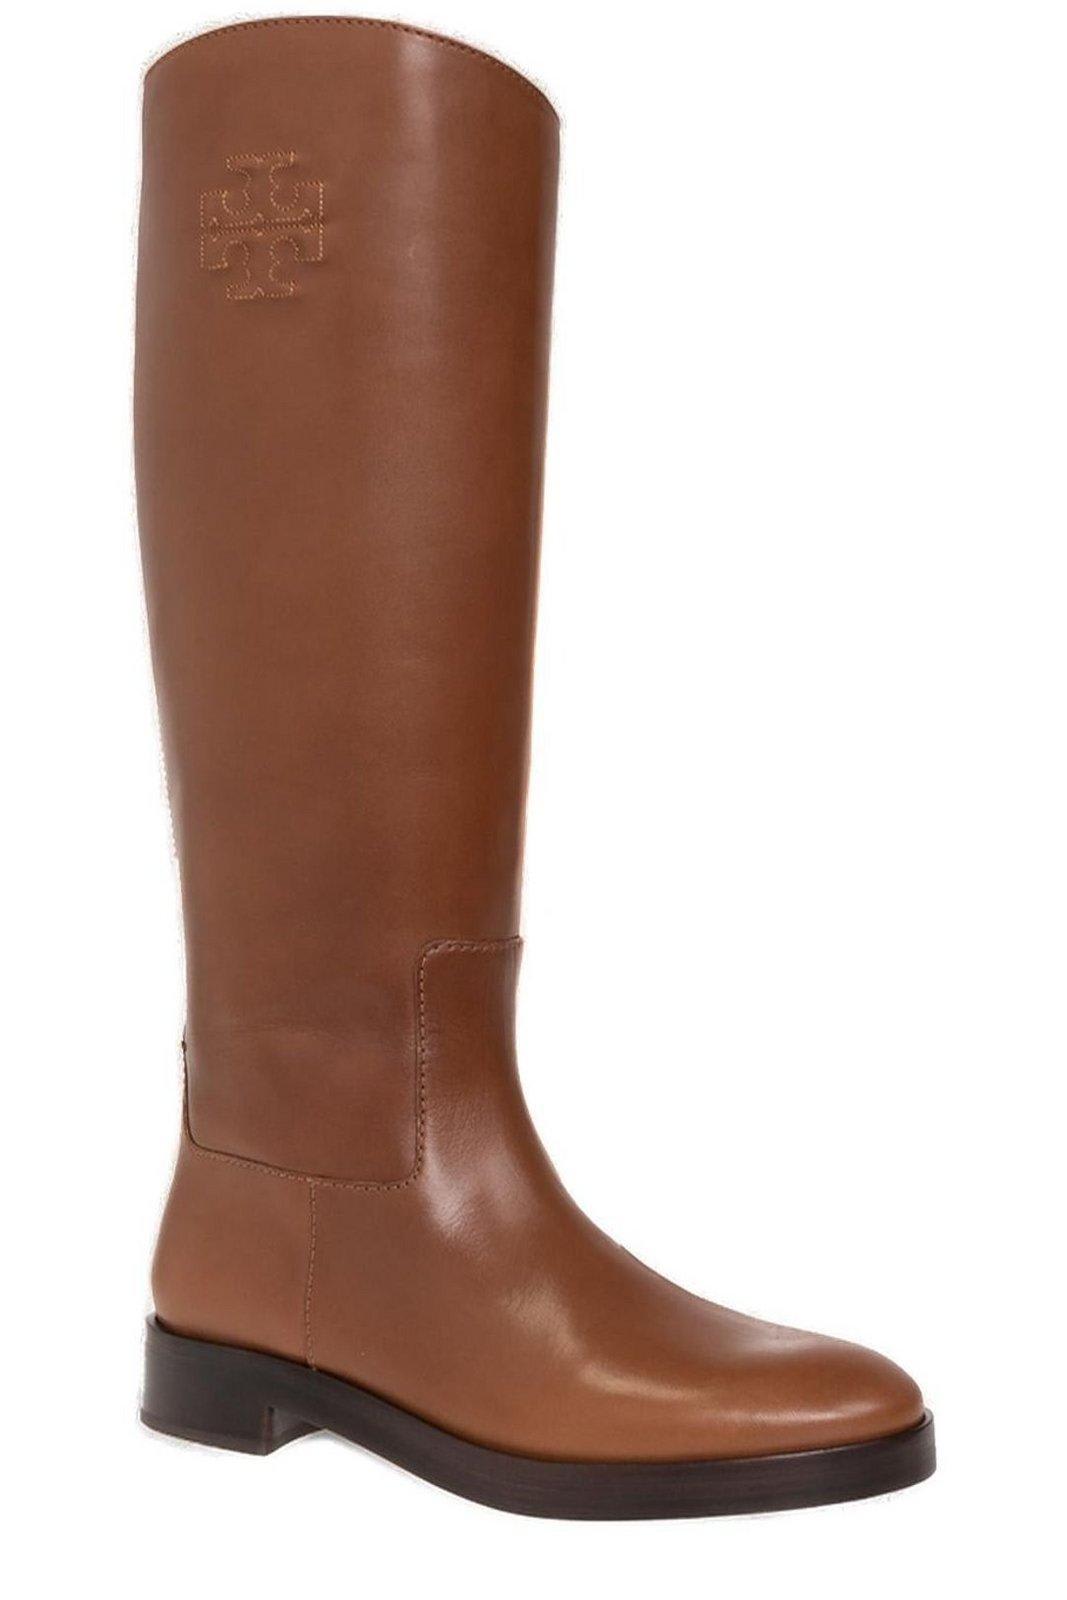 Tory Burch Logo Embossed Riding Boots